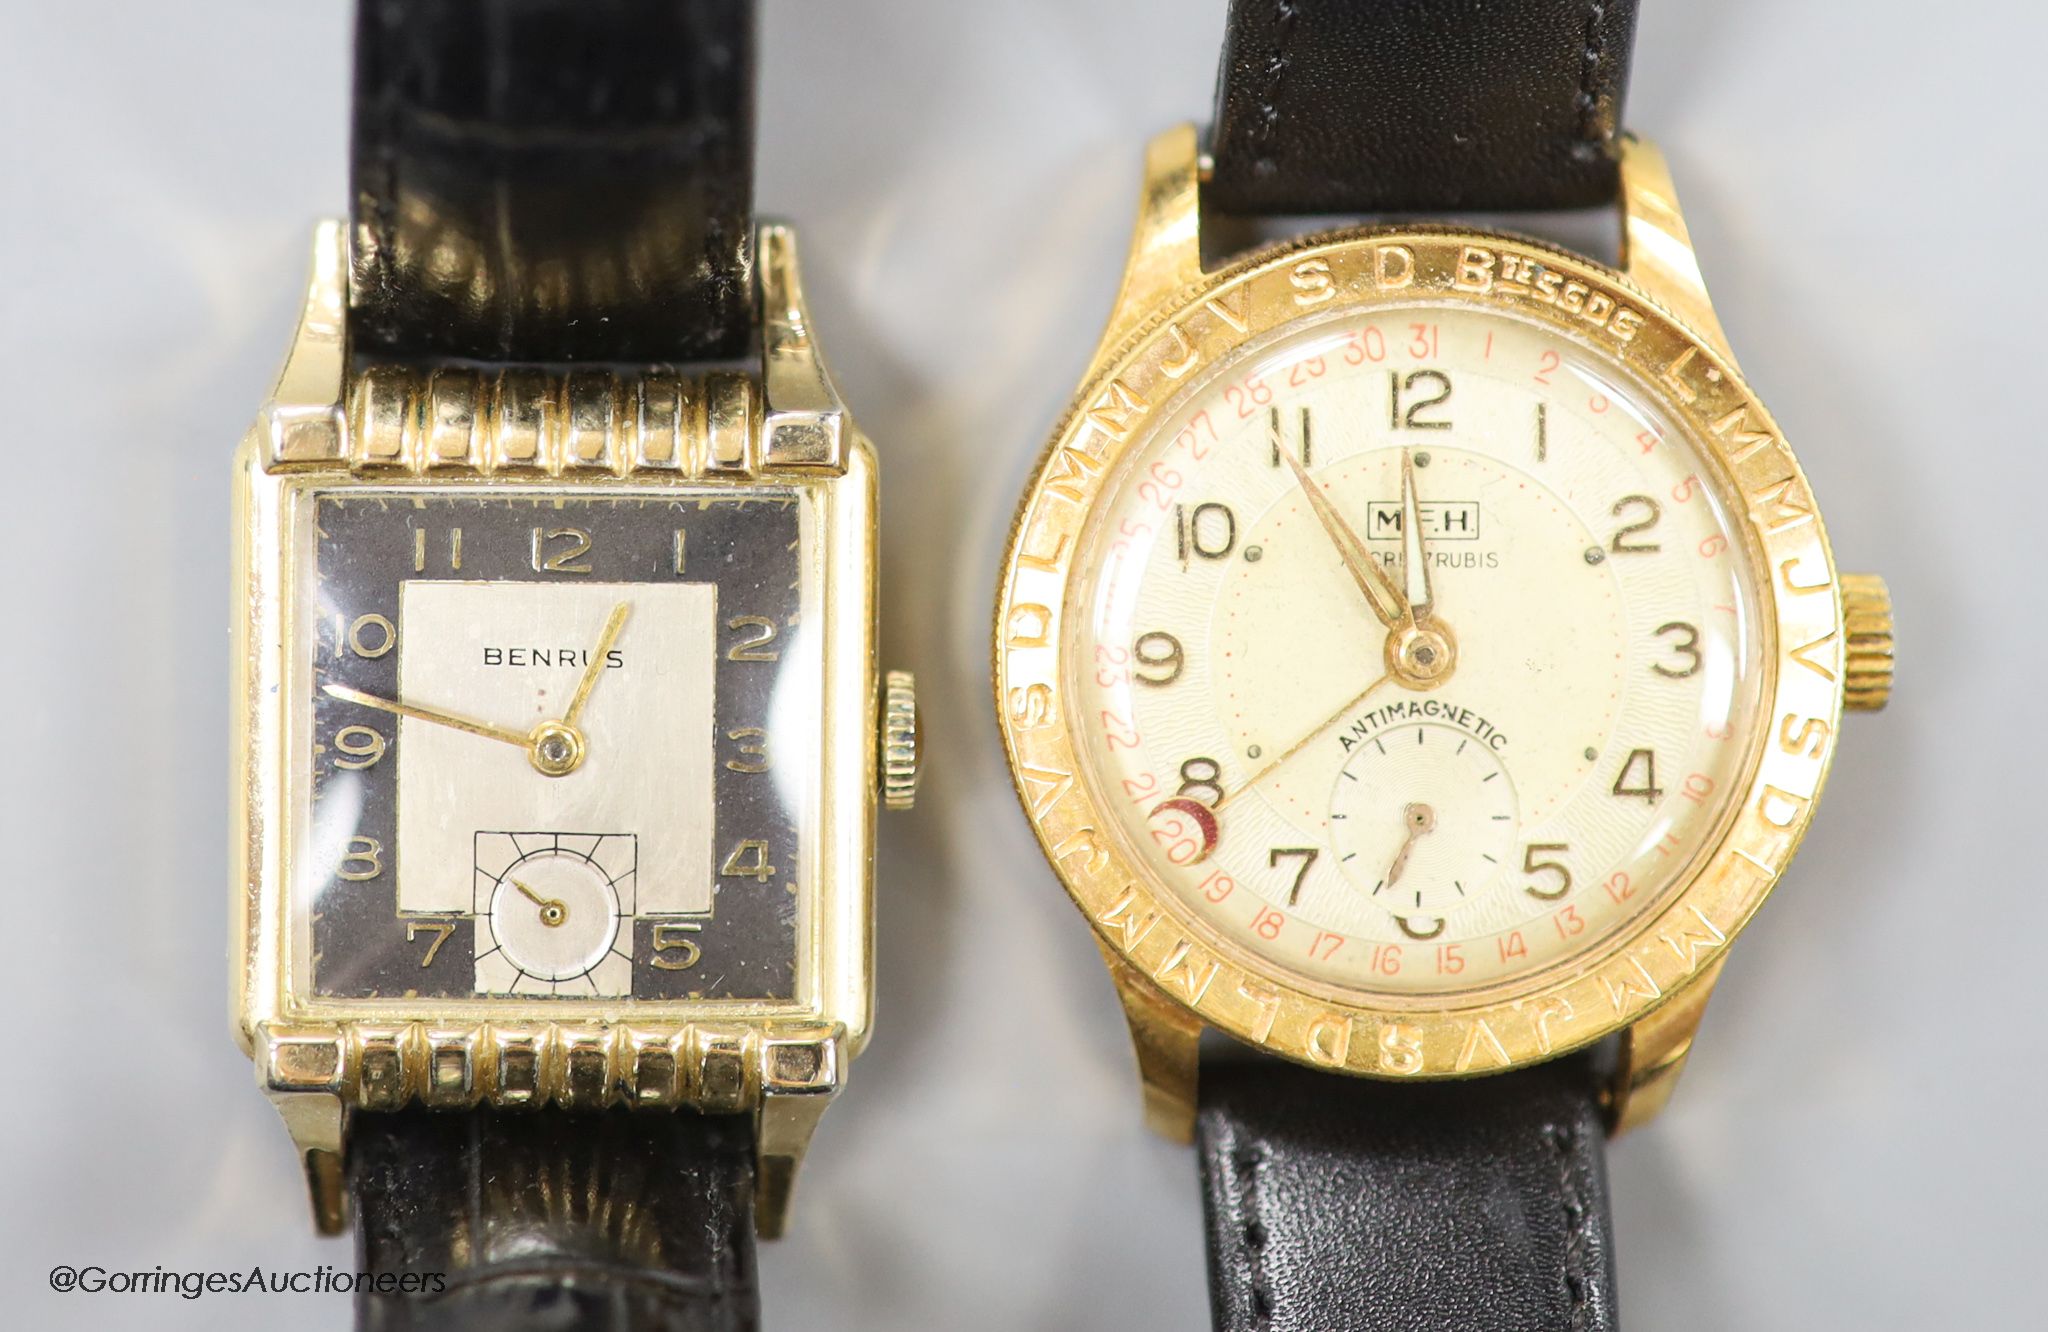 A gentleman's 1930's/1940's stainless steel and gold plated Benris rectangular dial manual wind wrist watch and a later stainless steel and gold plated M.F.H manual wind wrist watch.